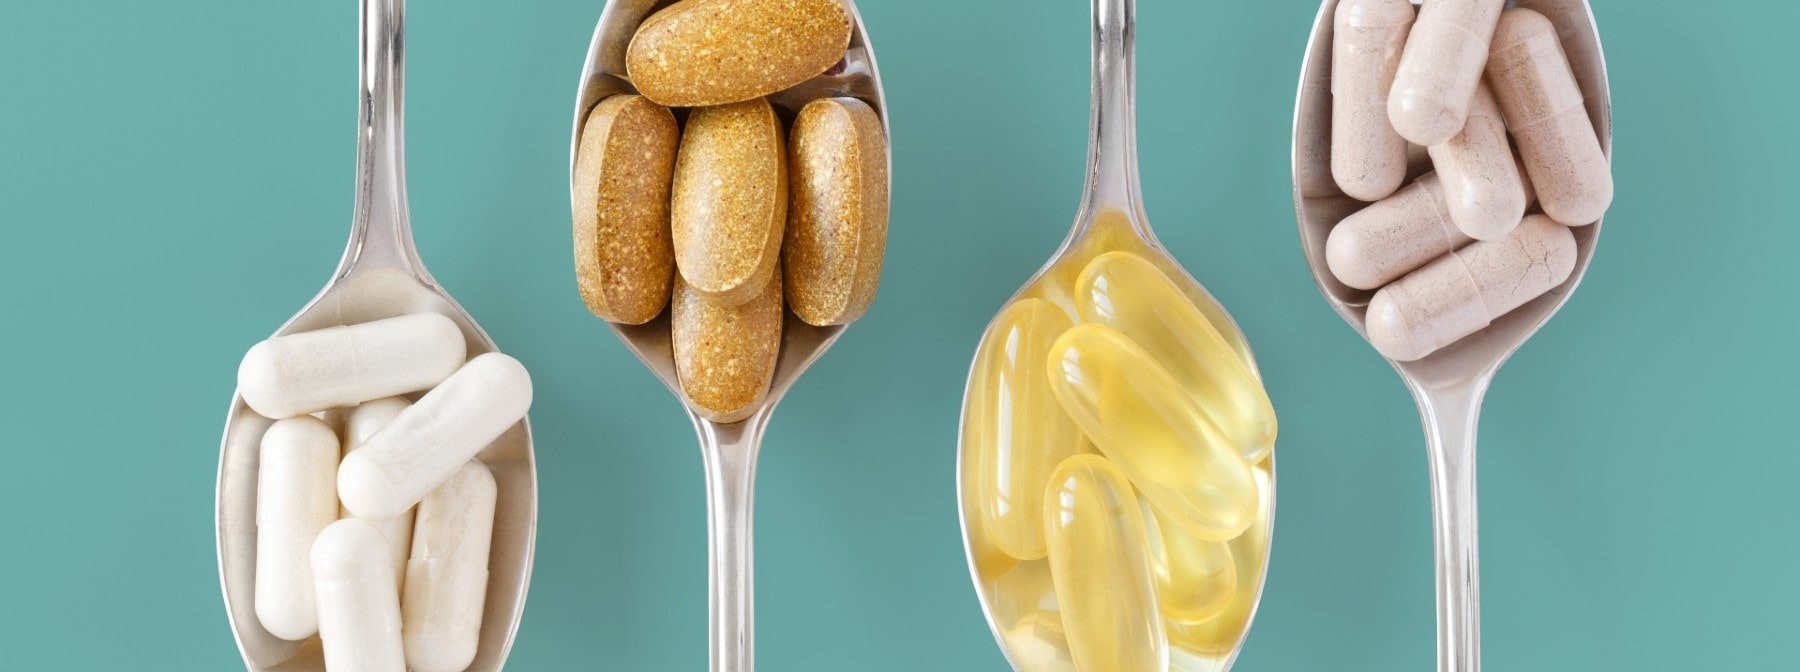 Are Multivitamins Worth It? Are They Good For You & Should You Take Them?